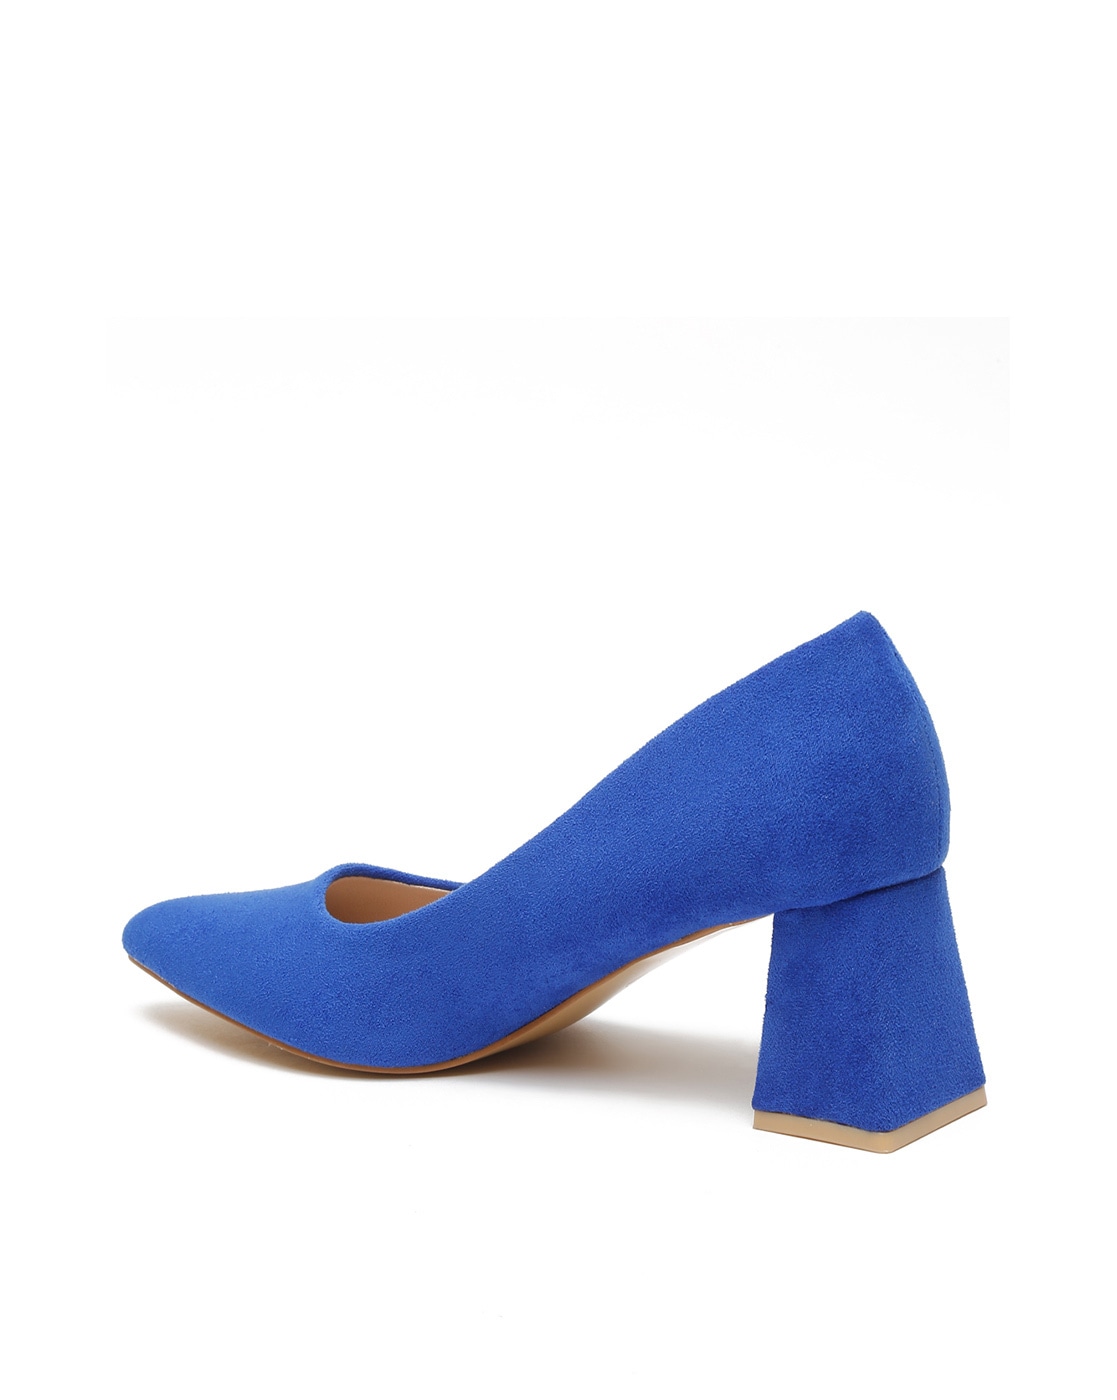 What heels go well with a blue dress? - Quora